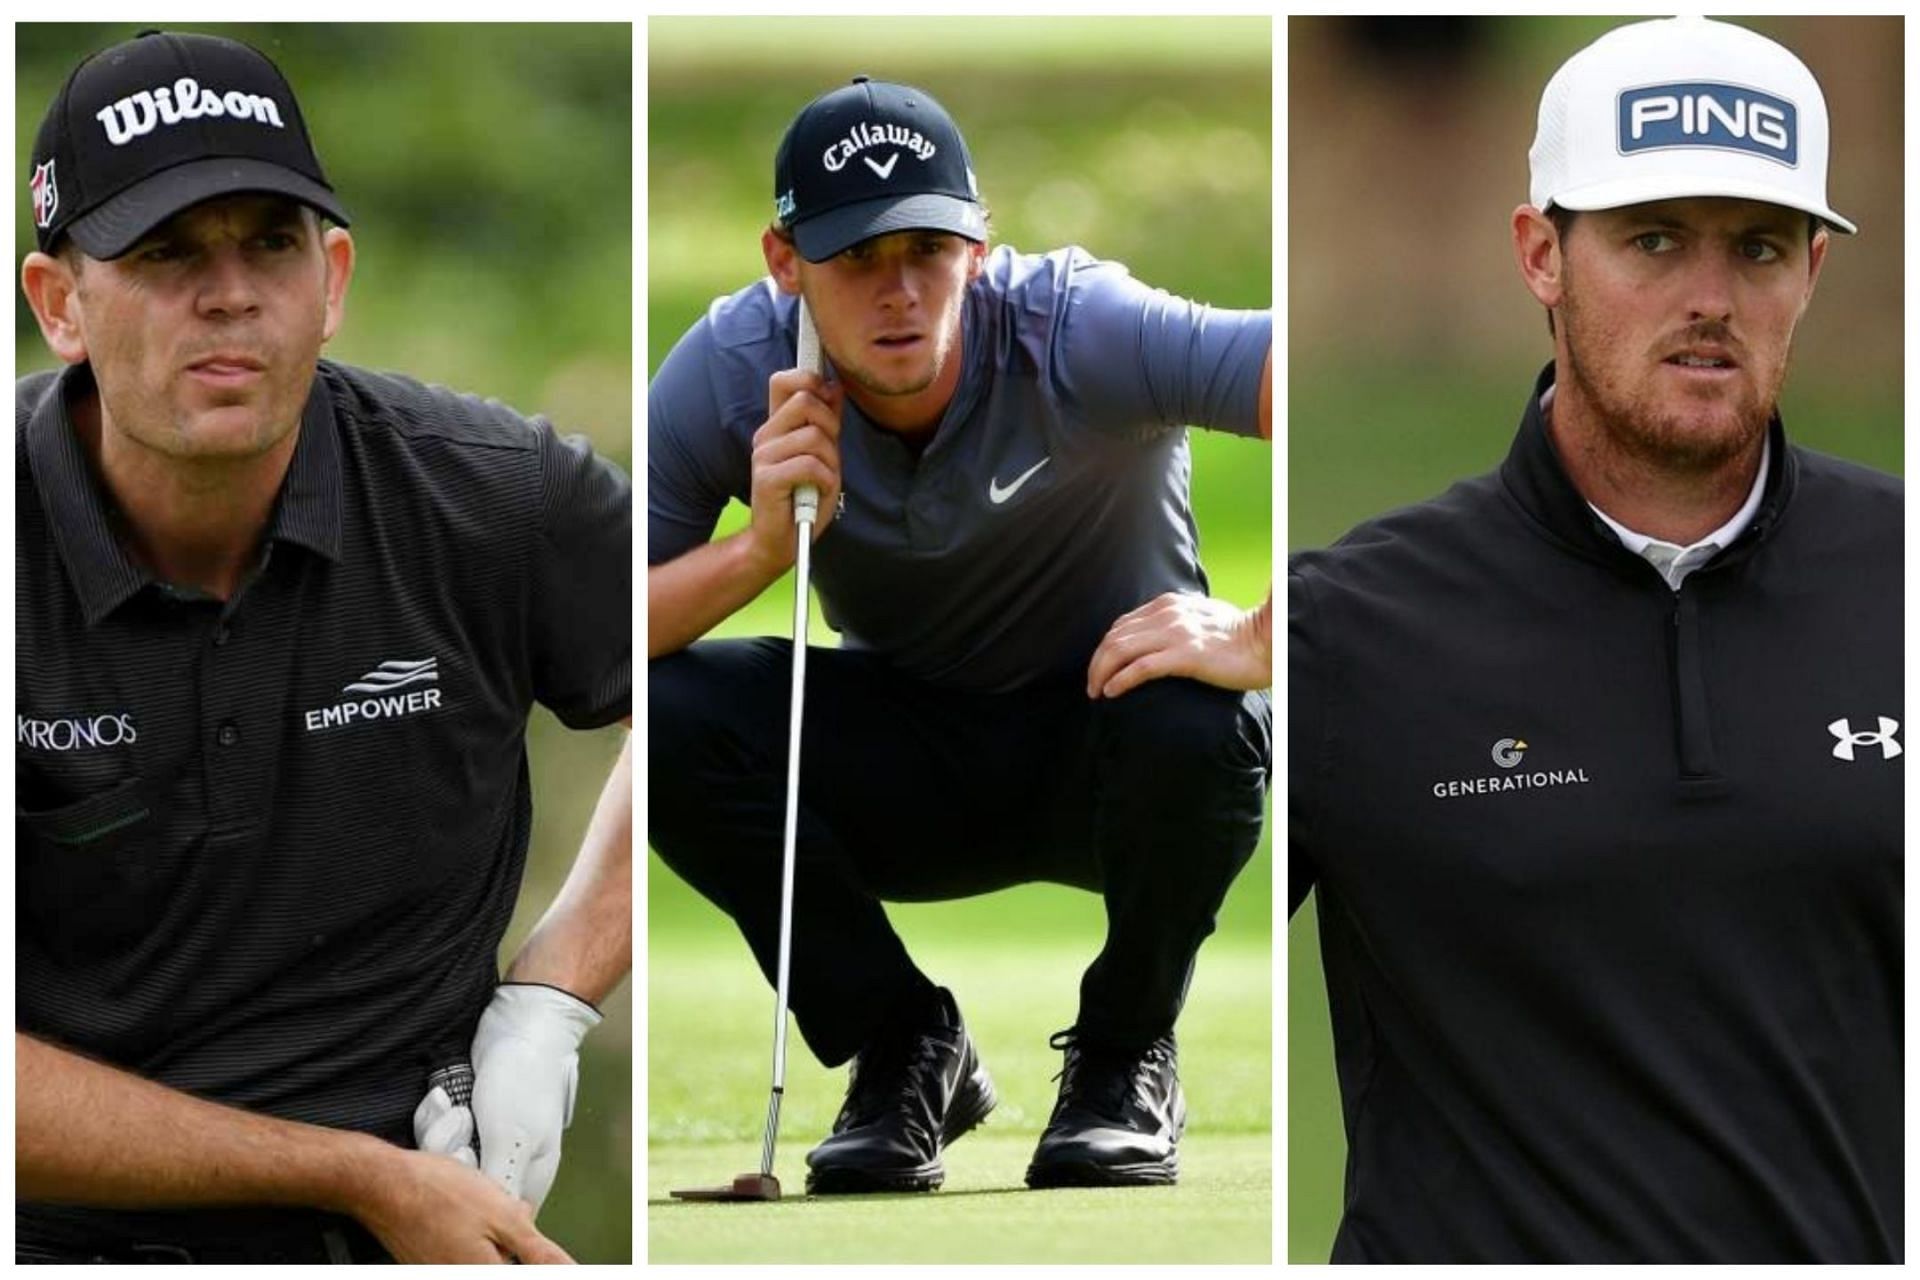 Brendan Steele, Thomas Pieters and Mito Pereira were among the players who joined the LIV Golf this year